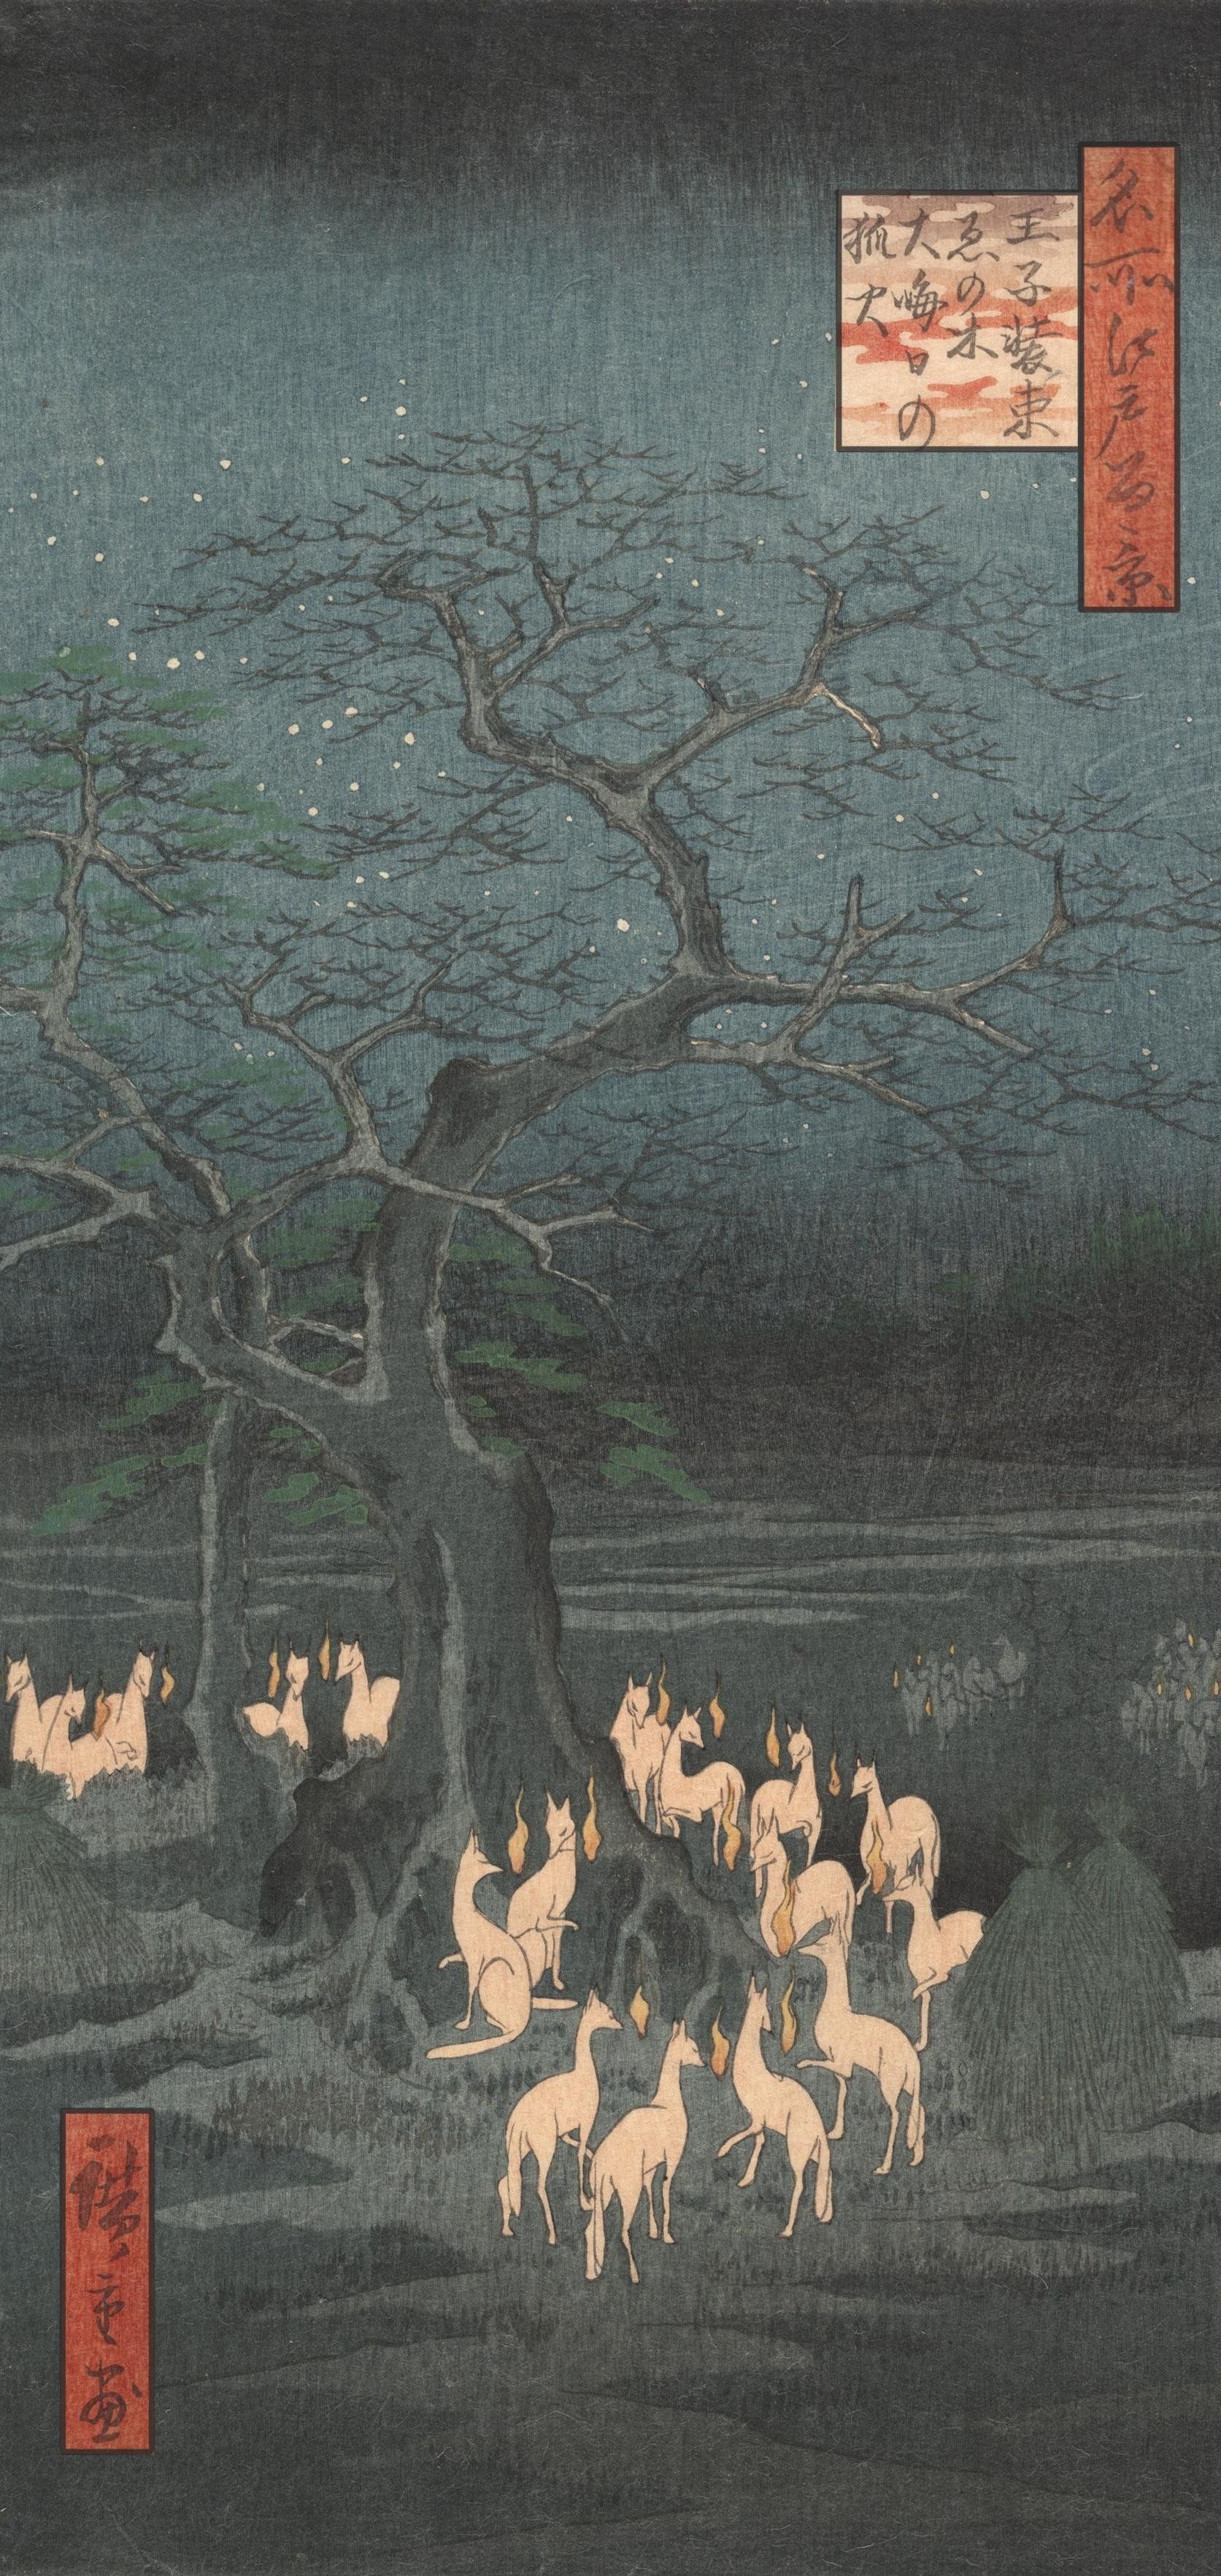 A Collection of 19:9 Cropped Japanese Woodblock Prints. Smart